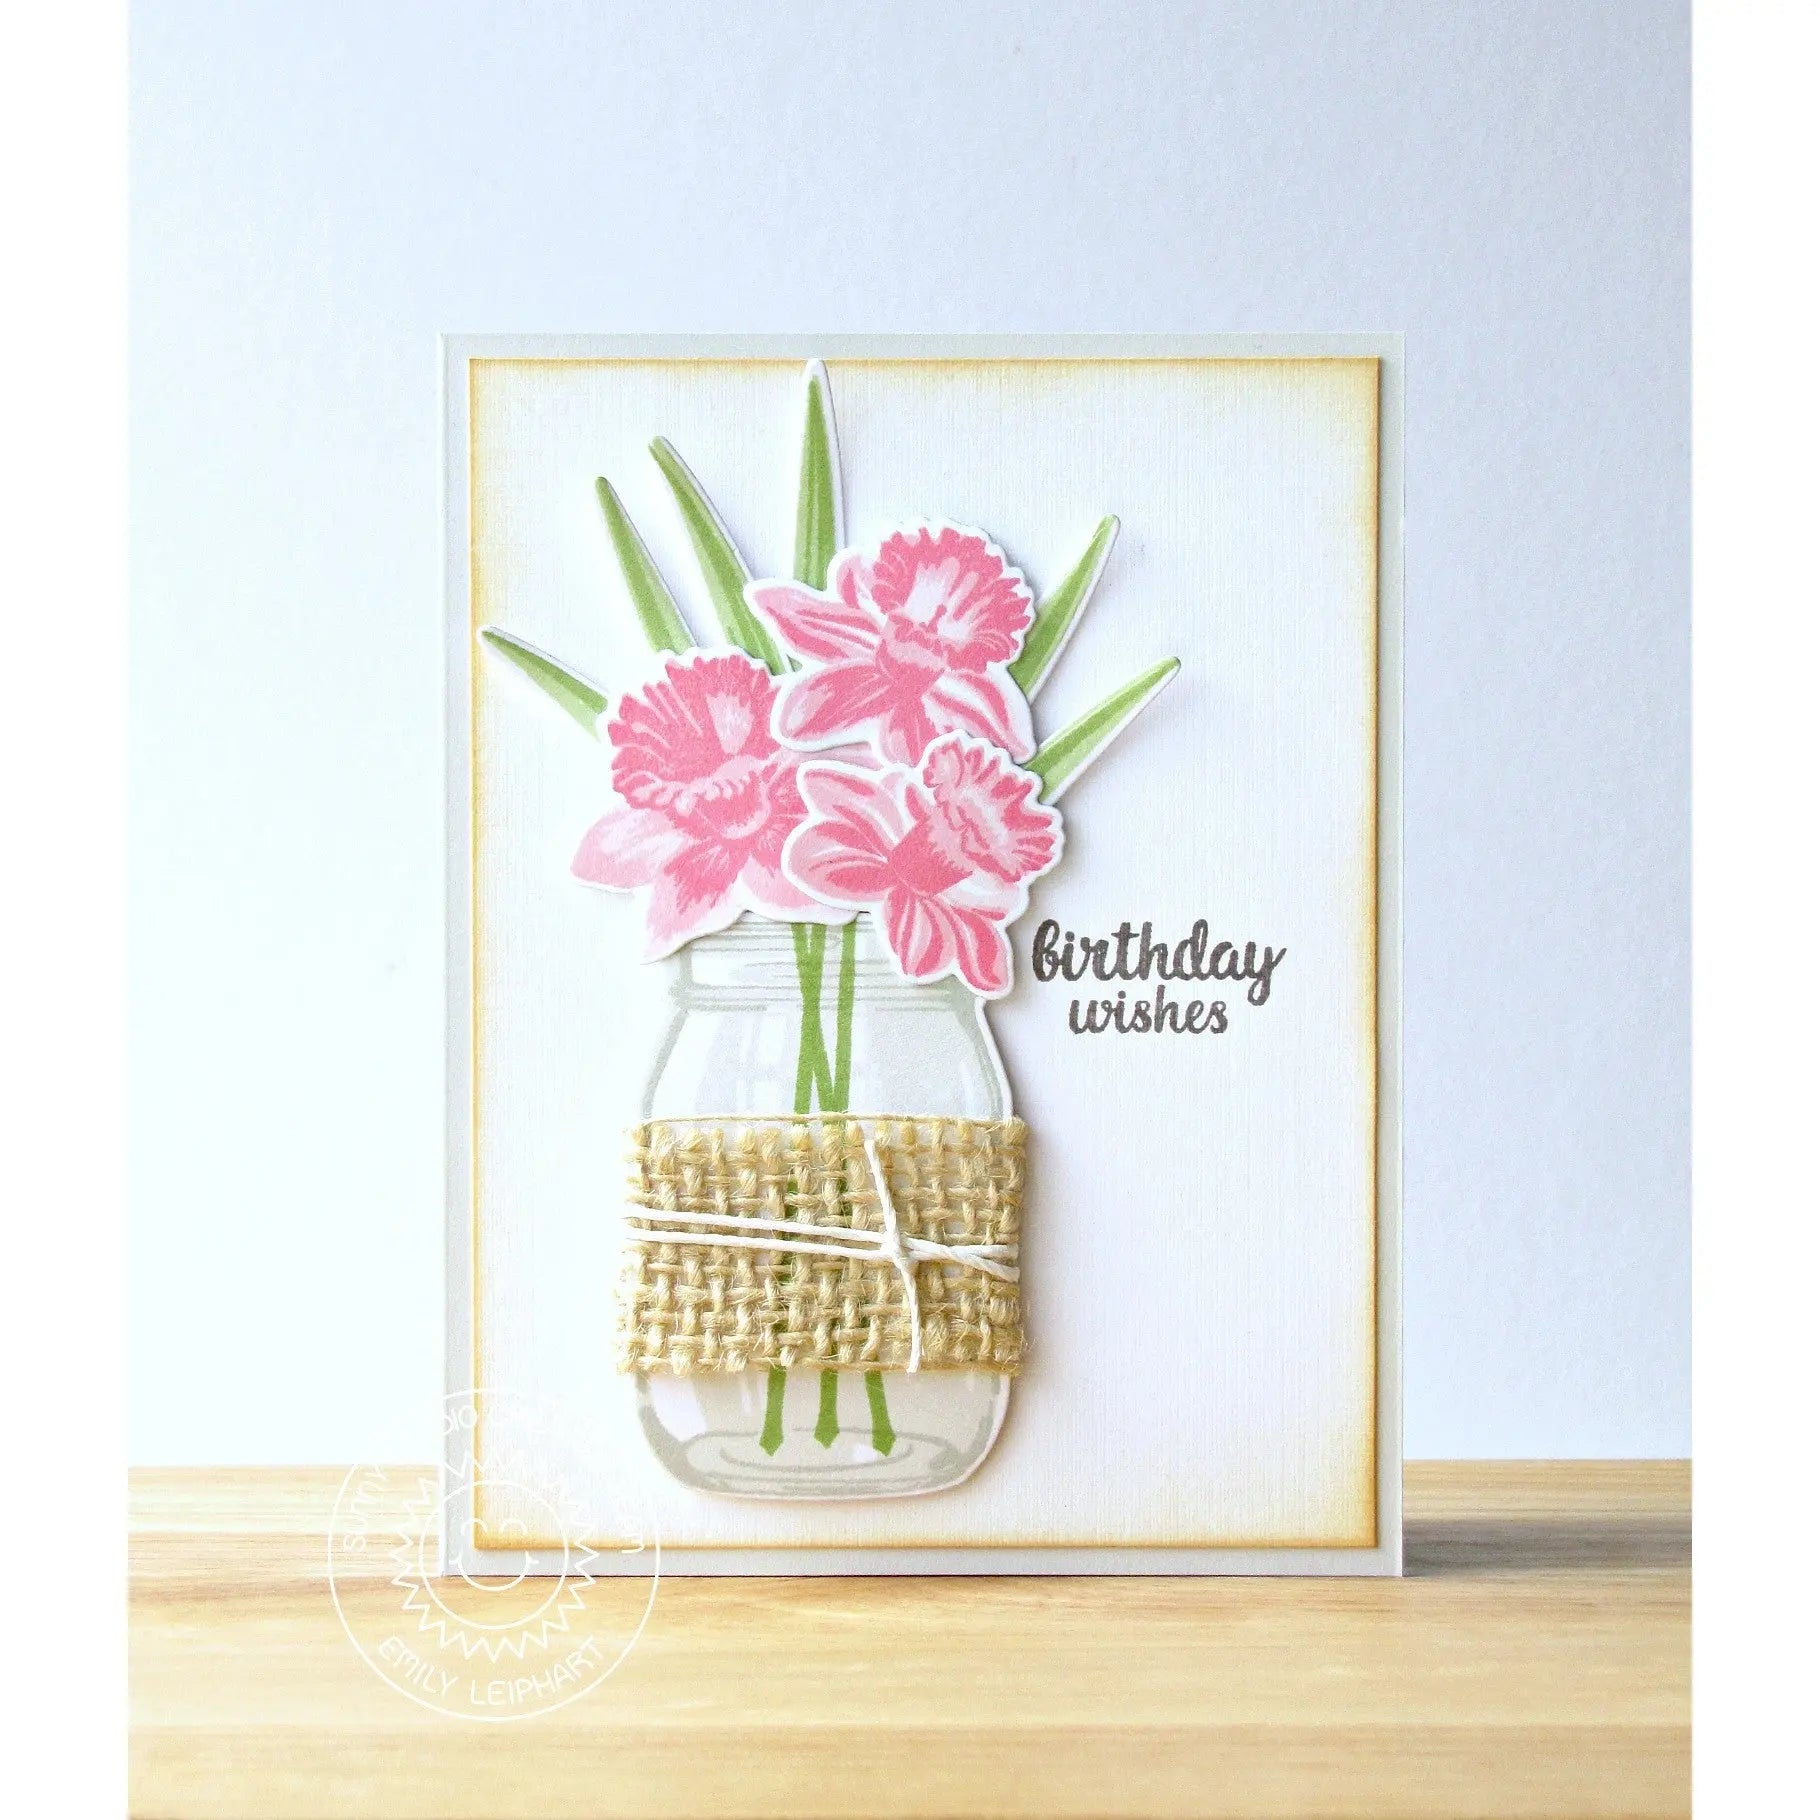 Sunny Studio Pink Floral Flowers in Vintage Jar Wrapped In Burlap Birthday Card (using Daffodil Dreams Clear Layering Stamps)